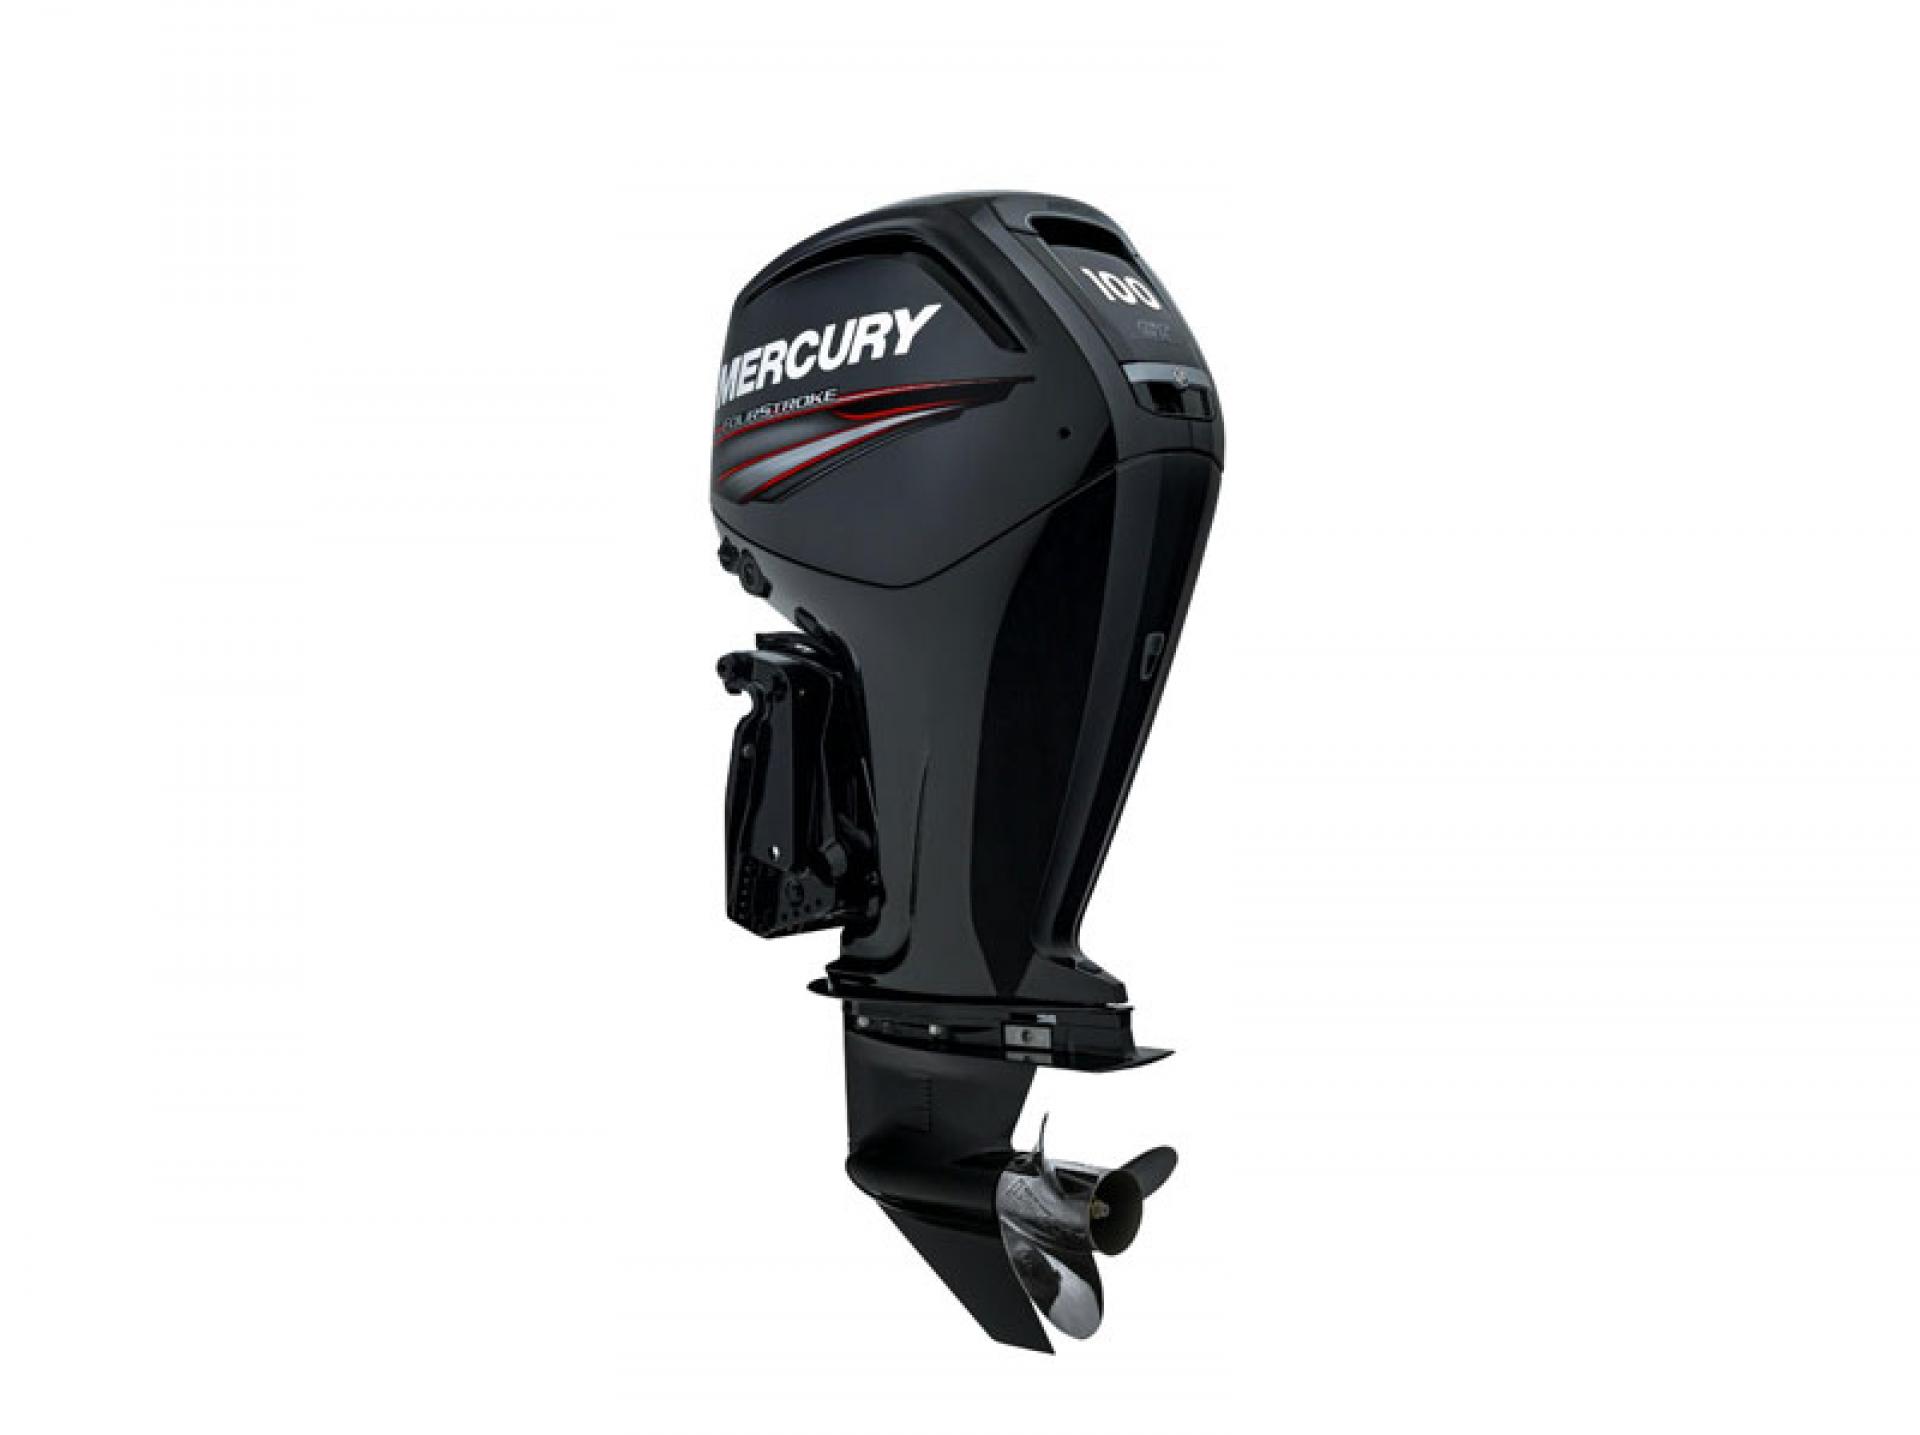 Image of an Outboard